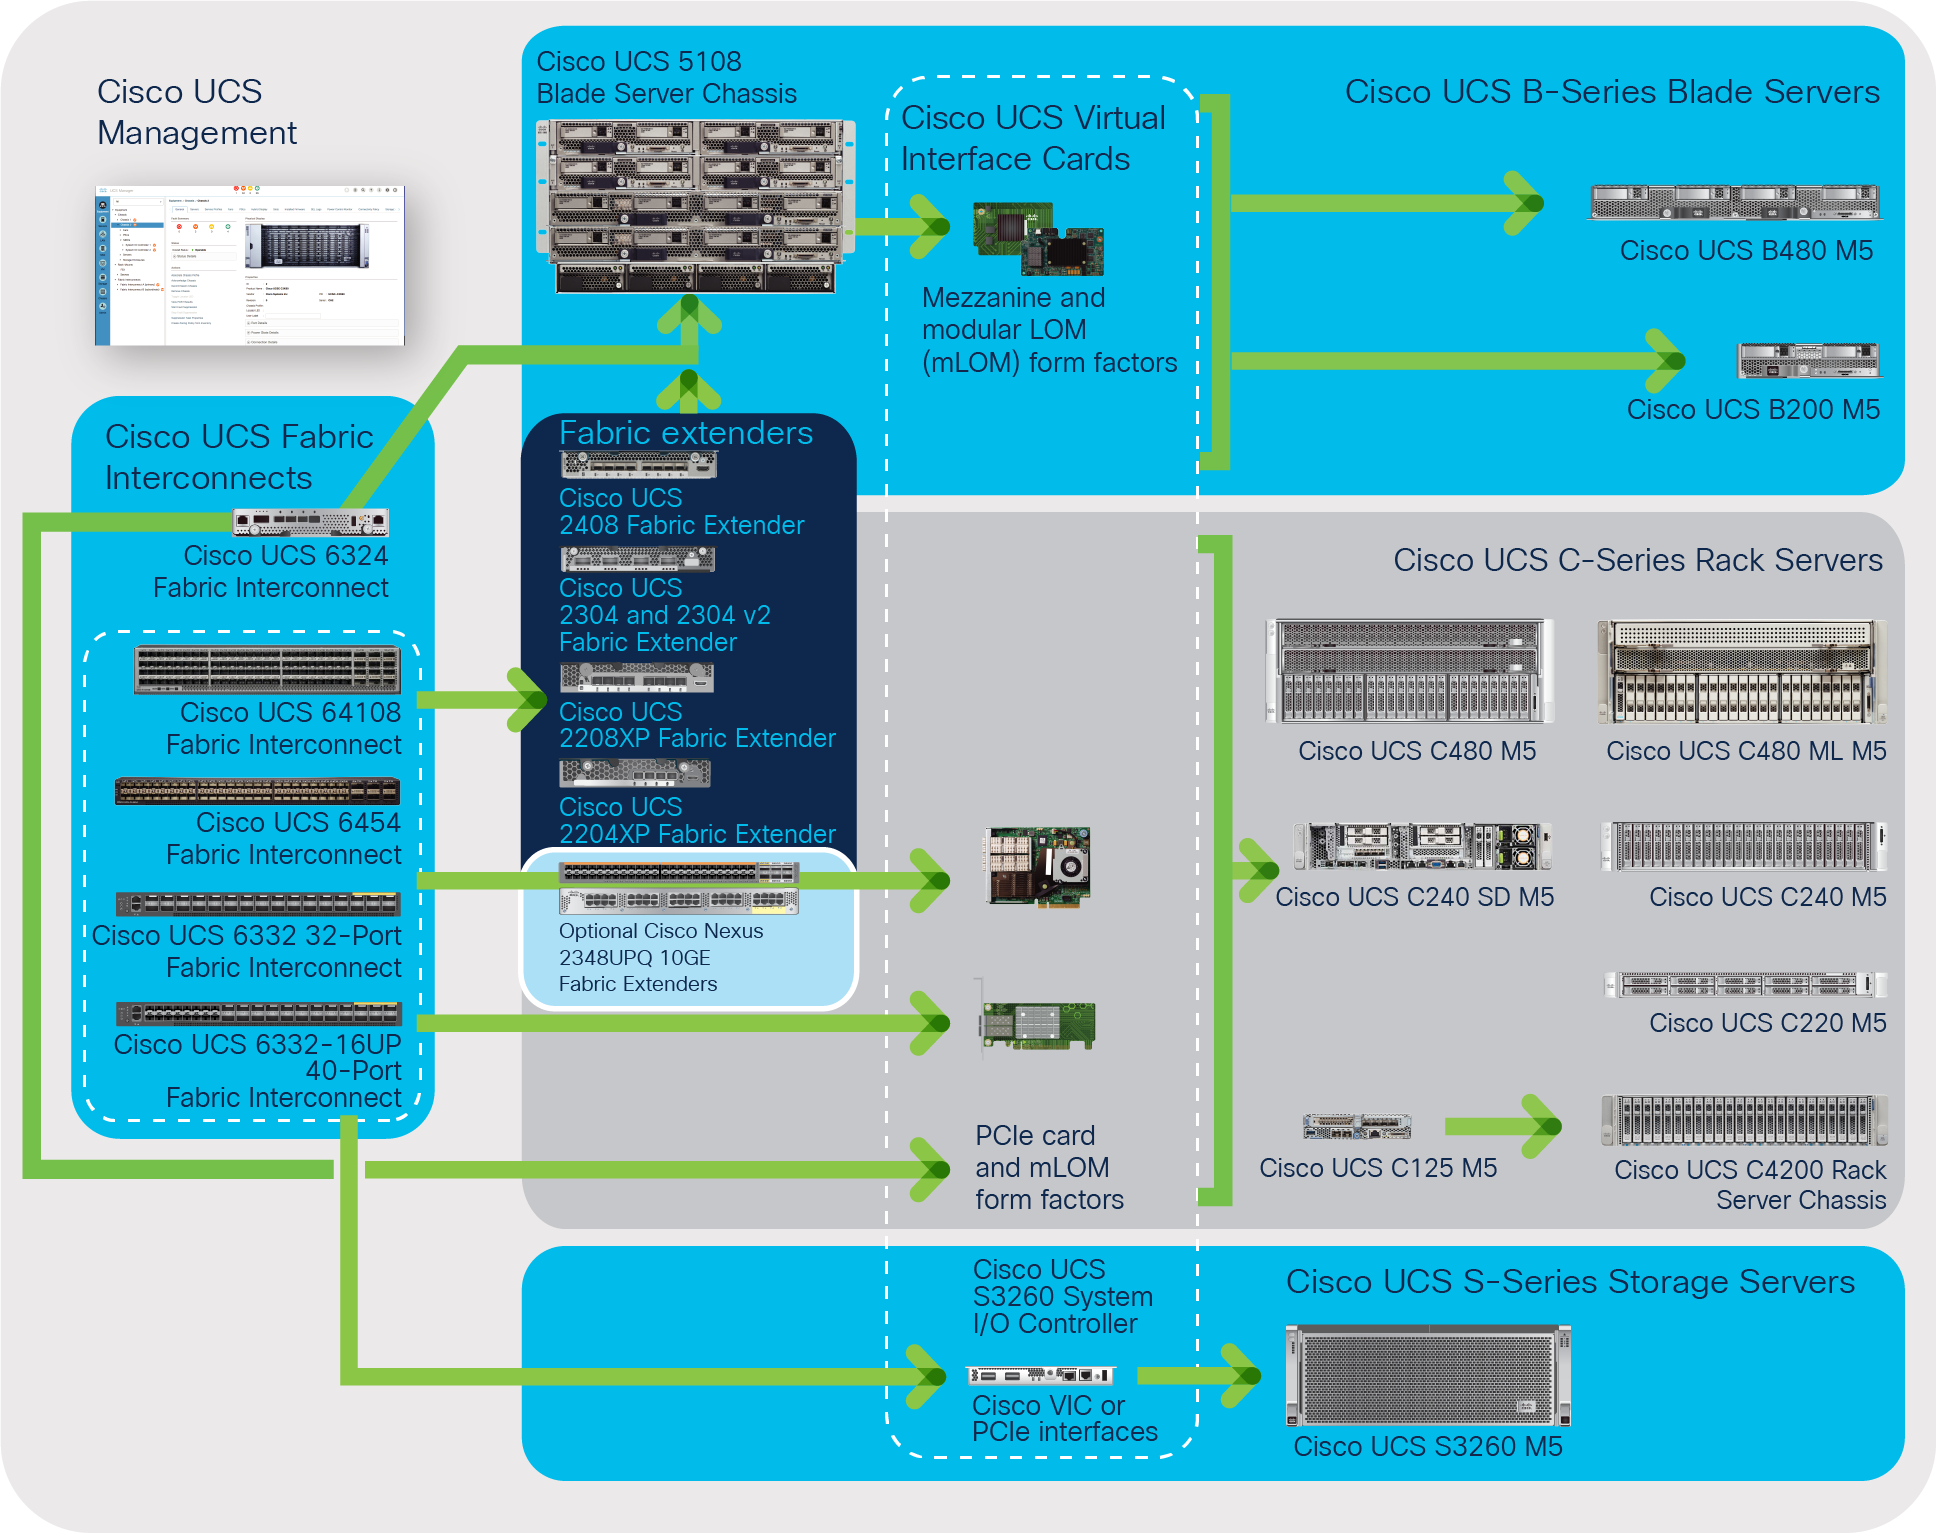 The Cisco Unified Computing System is a highly available cohesive architecture